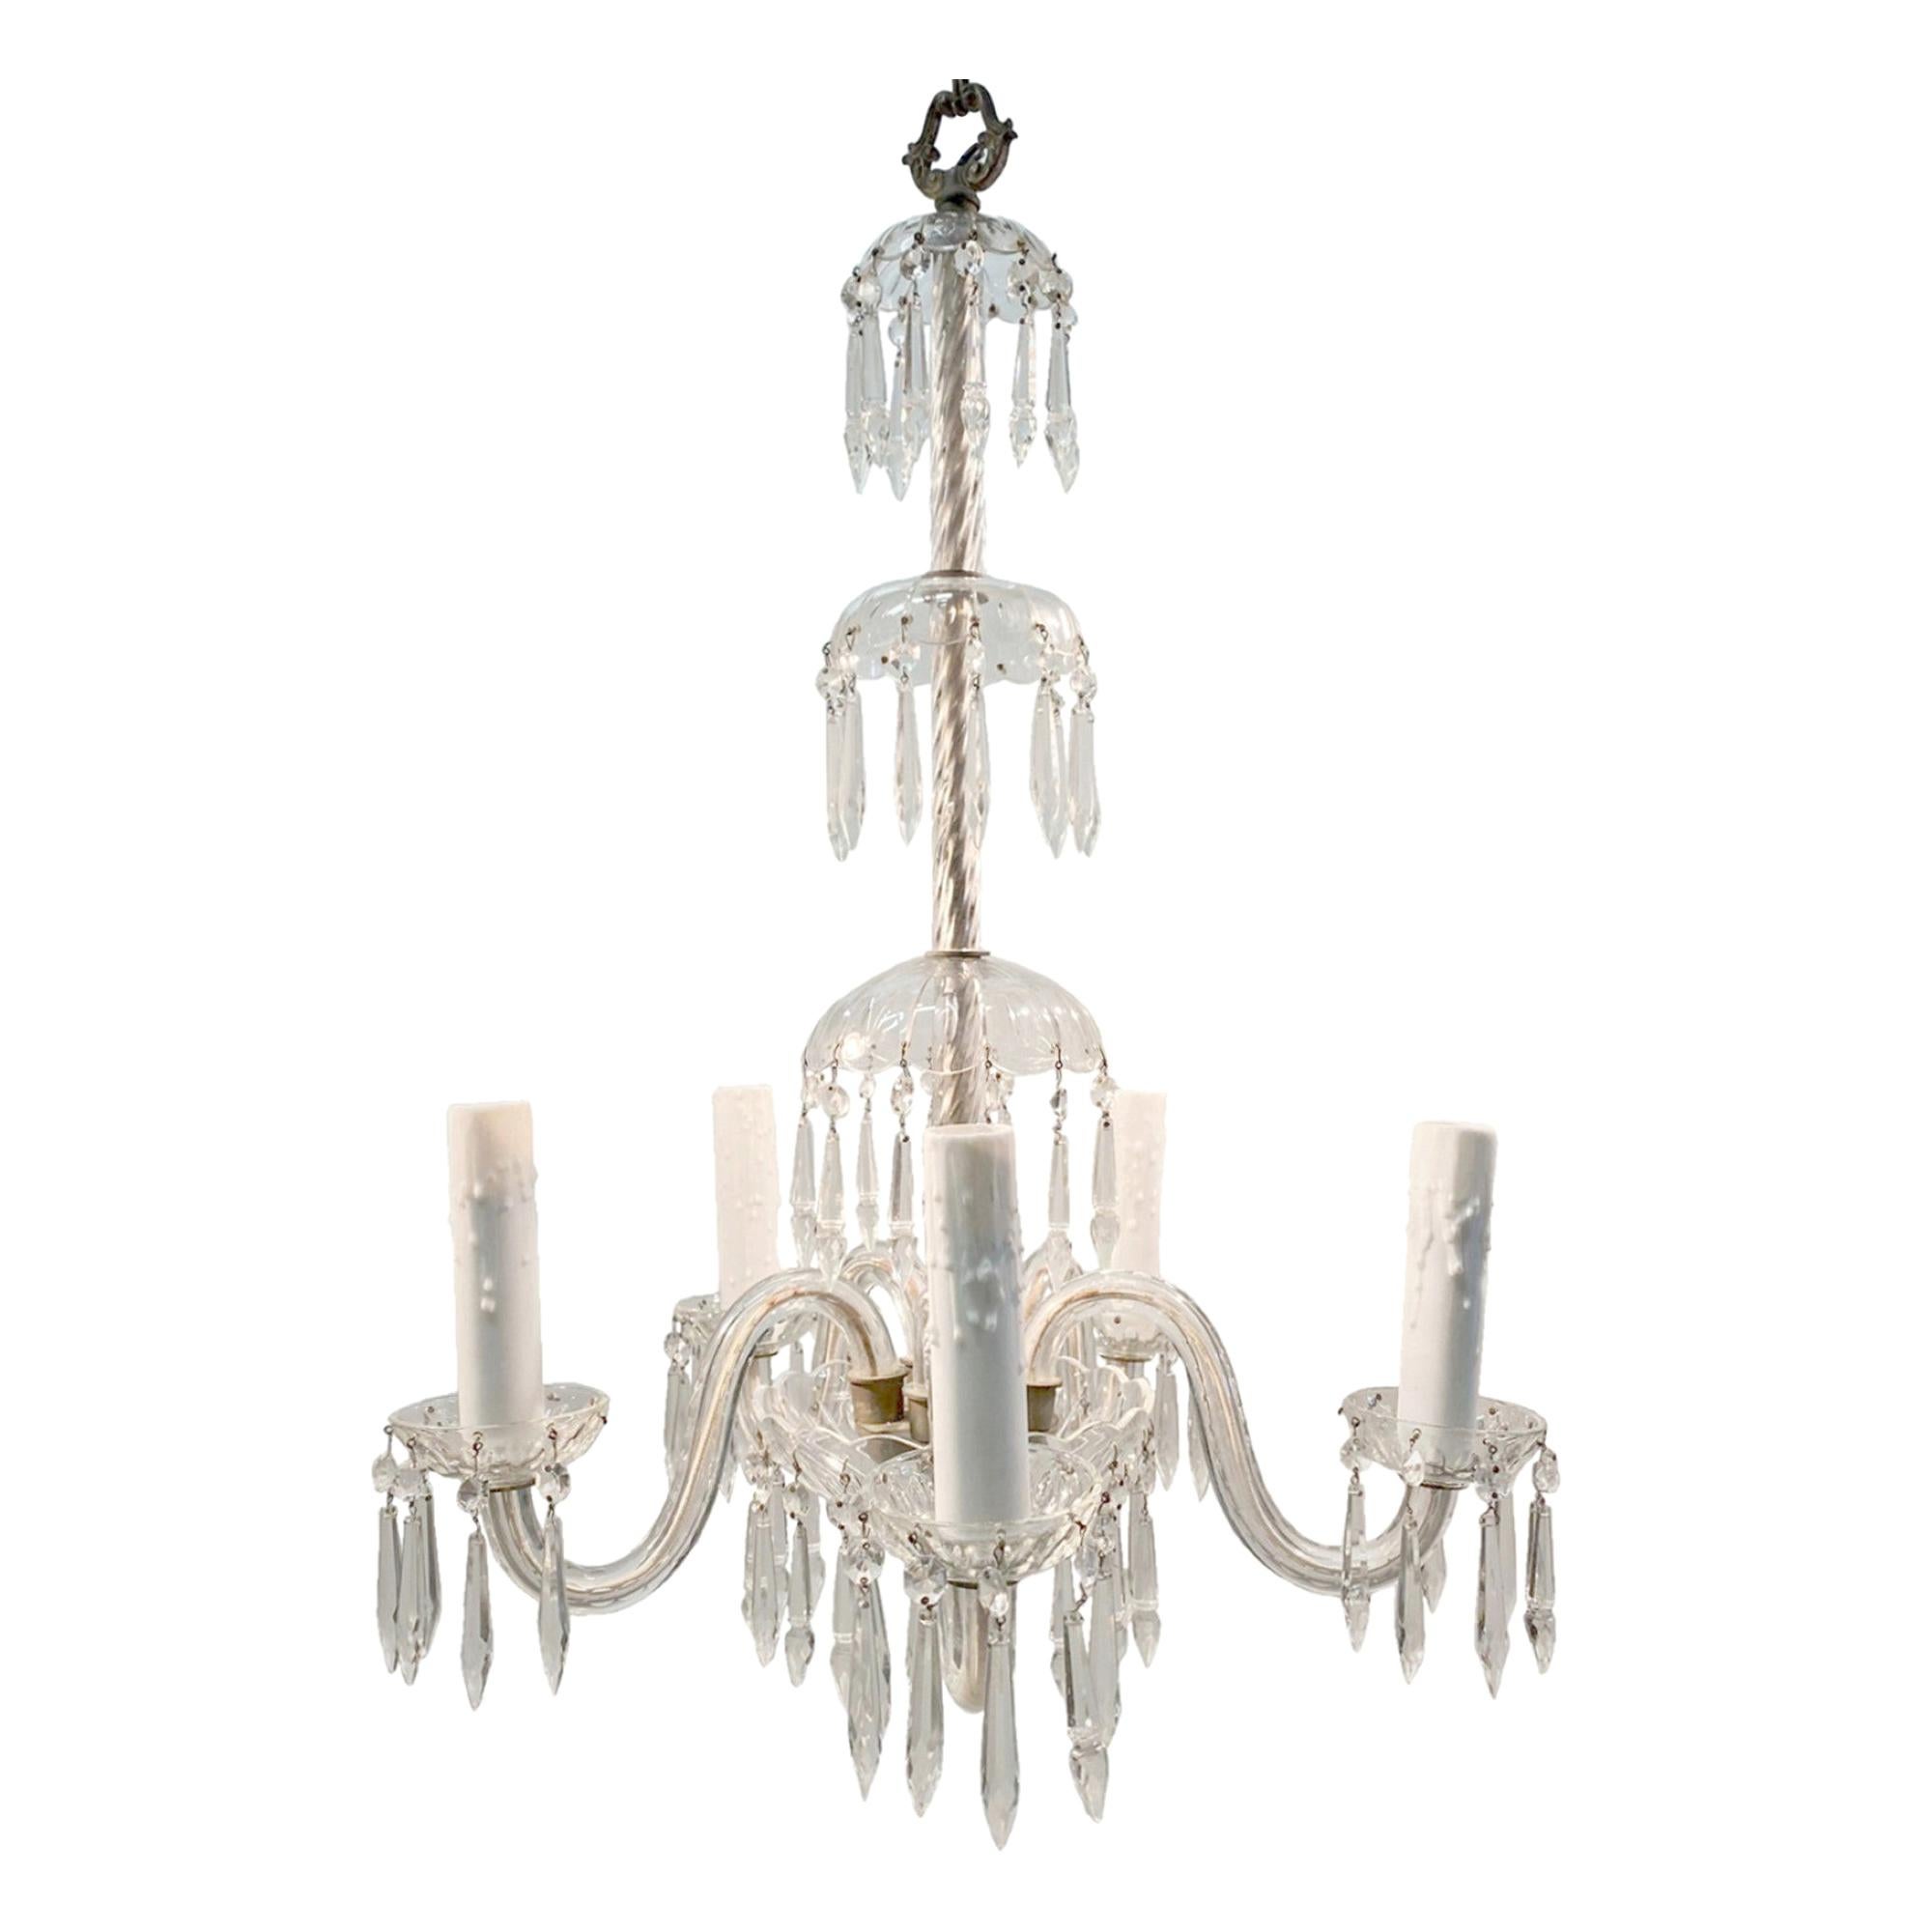 1920s Crystal Chandelier with 5 Arms and Long Crystals For Sale